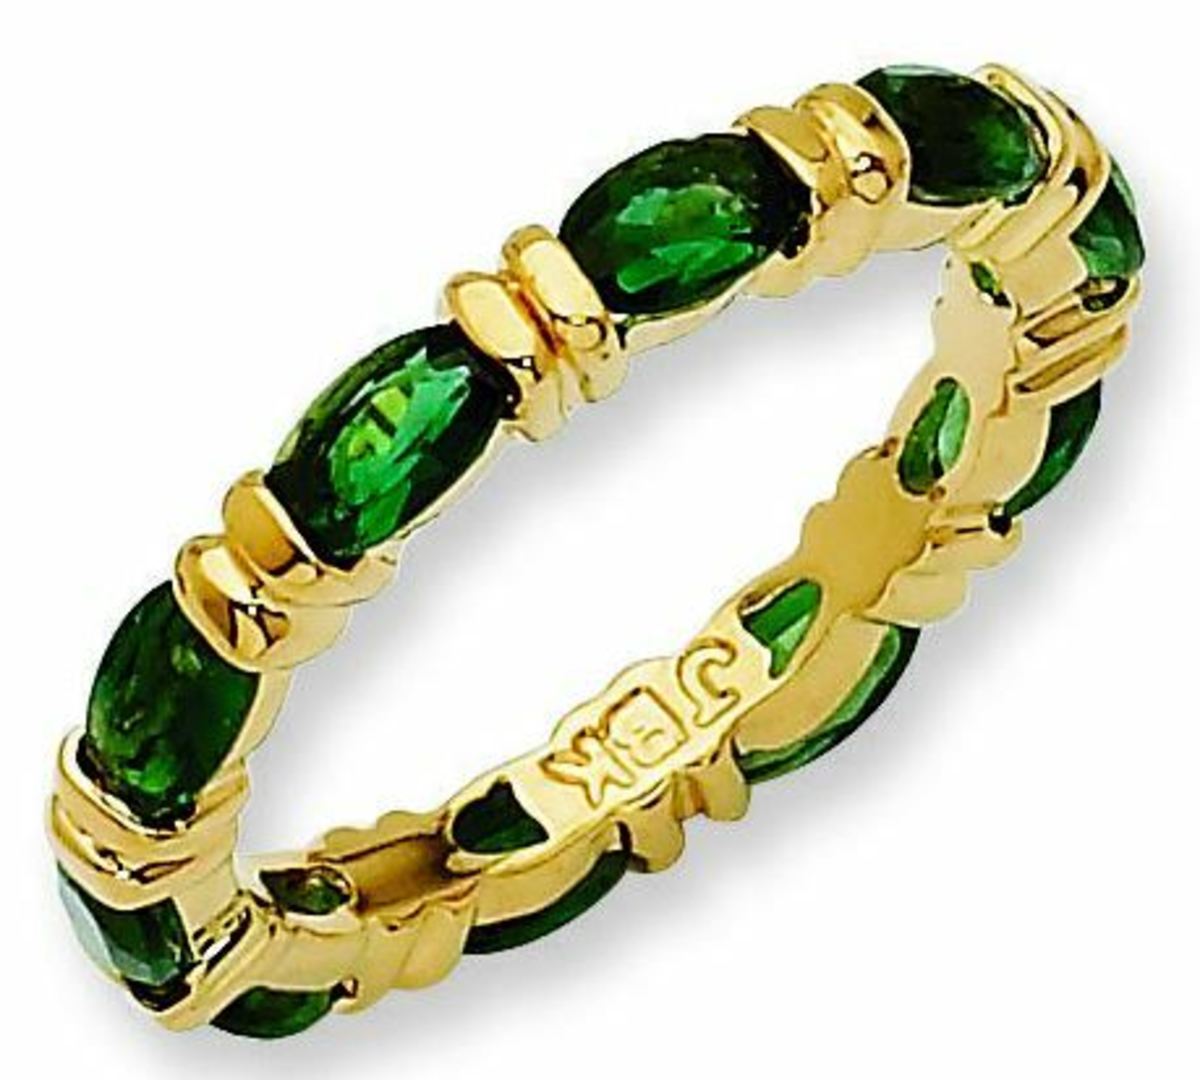 Jackie Kennedy's Van Cleef and Arpels 10th Anniversary Ring with Emeralds